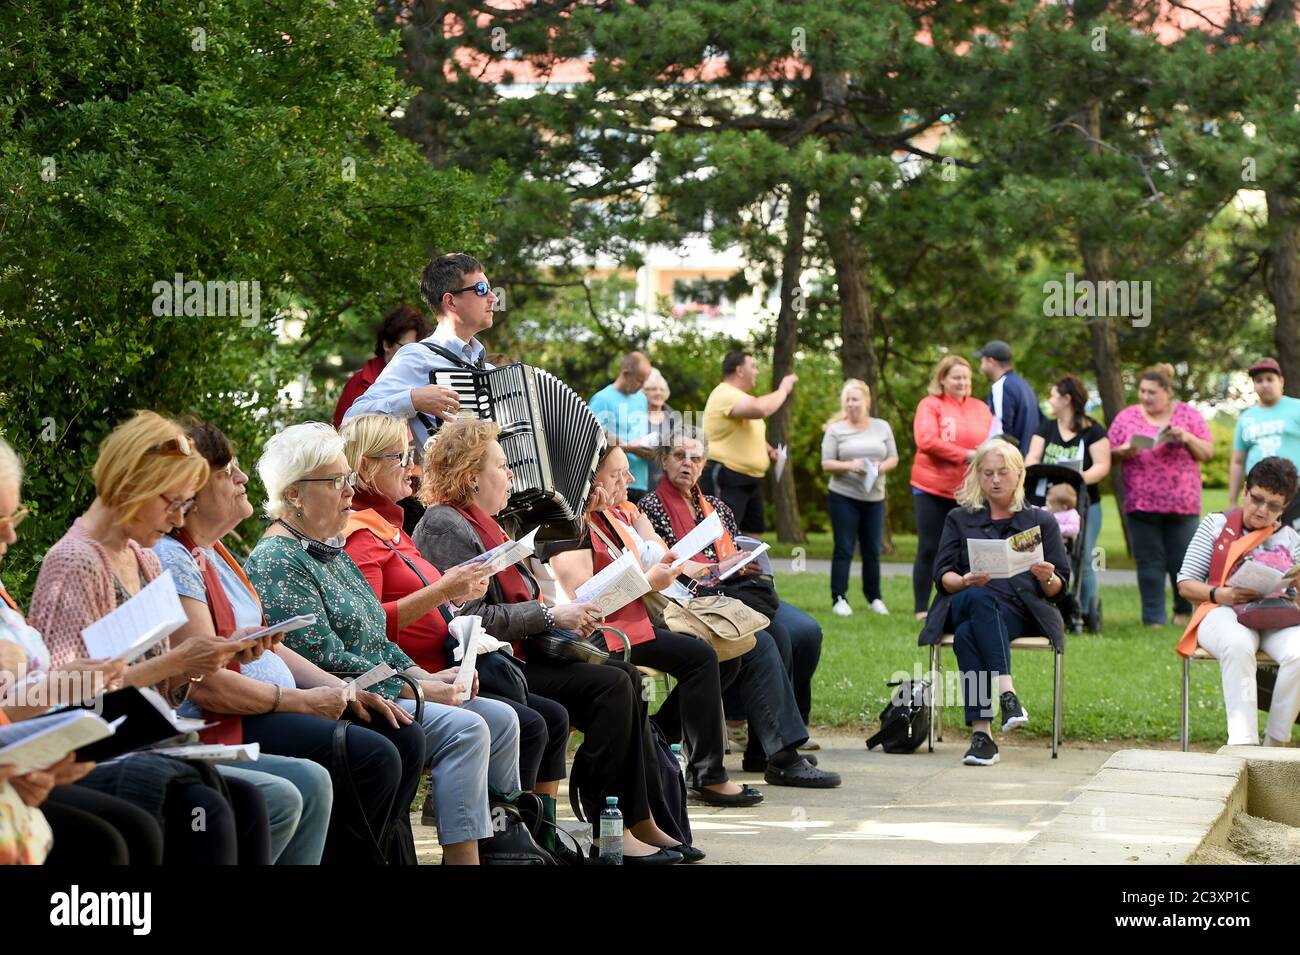 Vienna, Austria. 22nd June, 2020. Members of the 1st Viennese Community Choir sing for residents at a community in Vienna, Austria, on June 22, 2020. Members of the 1st Viennese Community Choir gave a performance at a community in Vienna on Monday, the first time since the lifting of COVID-19 restrictions. The choir, founded in 2008, is composed of ordinary residents. Credit: Guo Chen/Xinhua/Alamy Live News Stock Photo